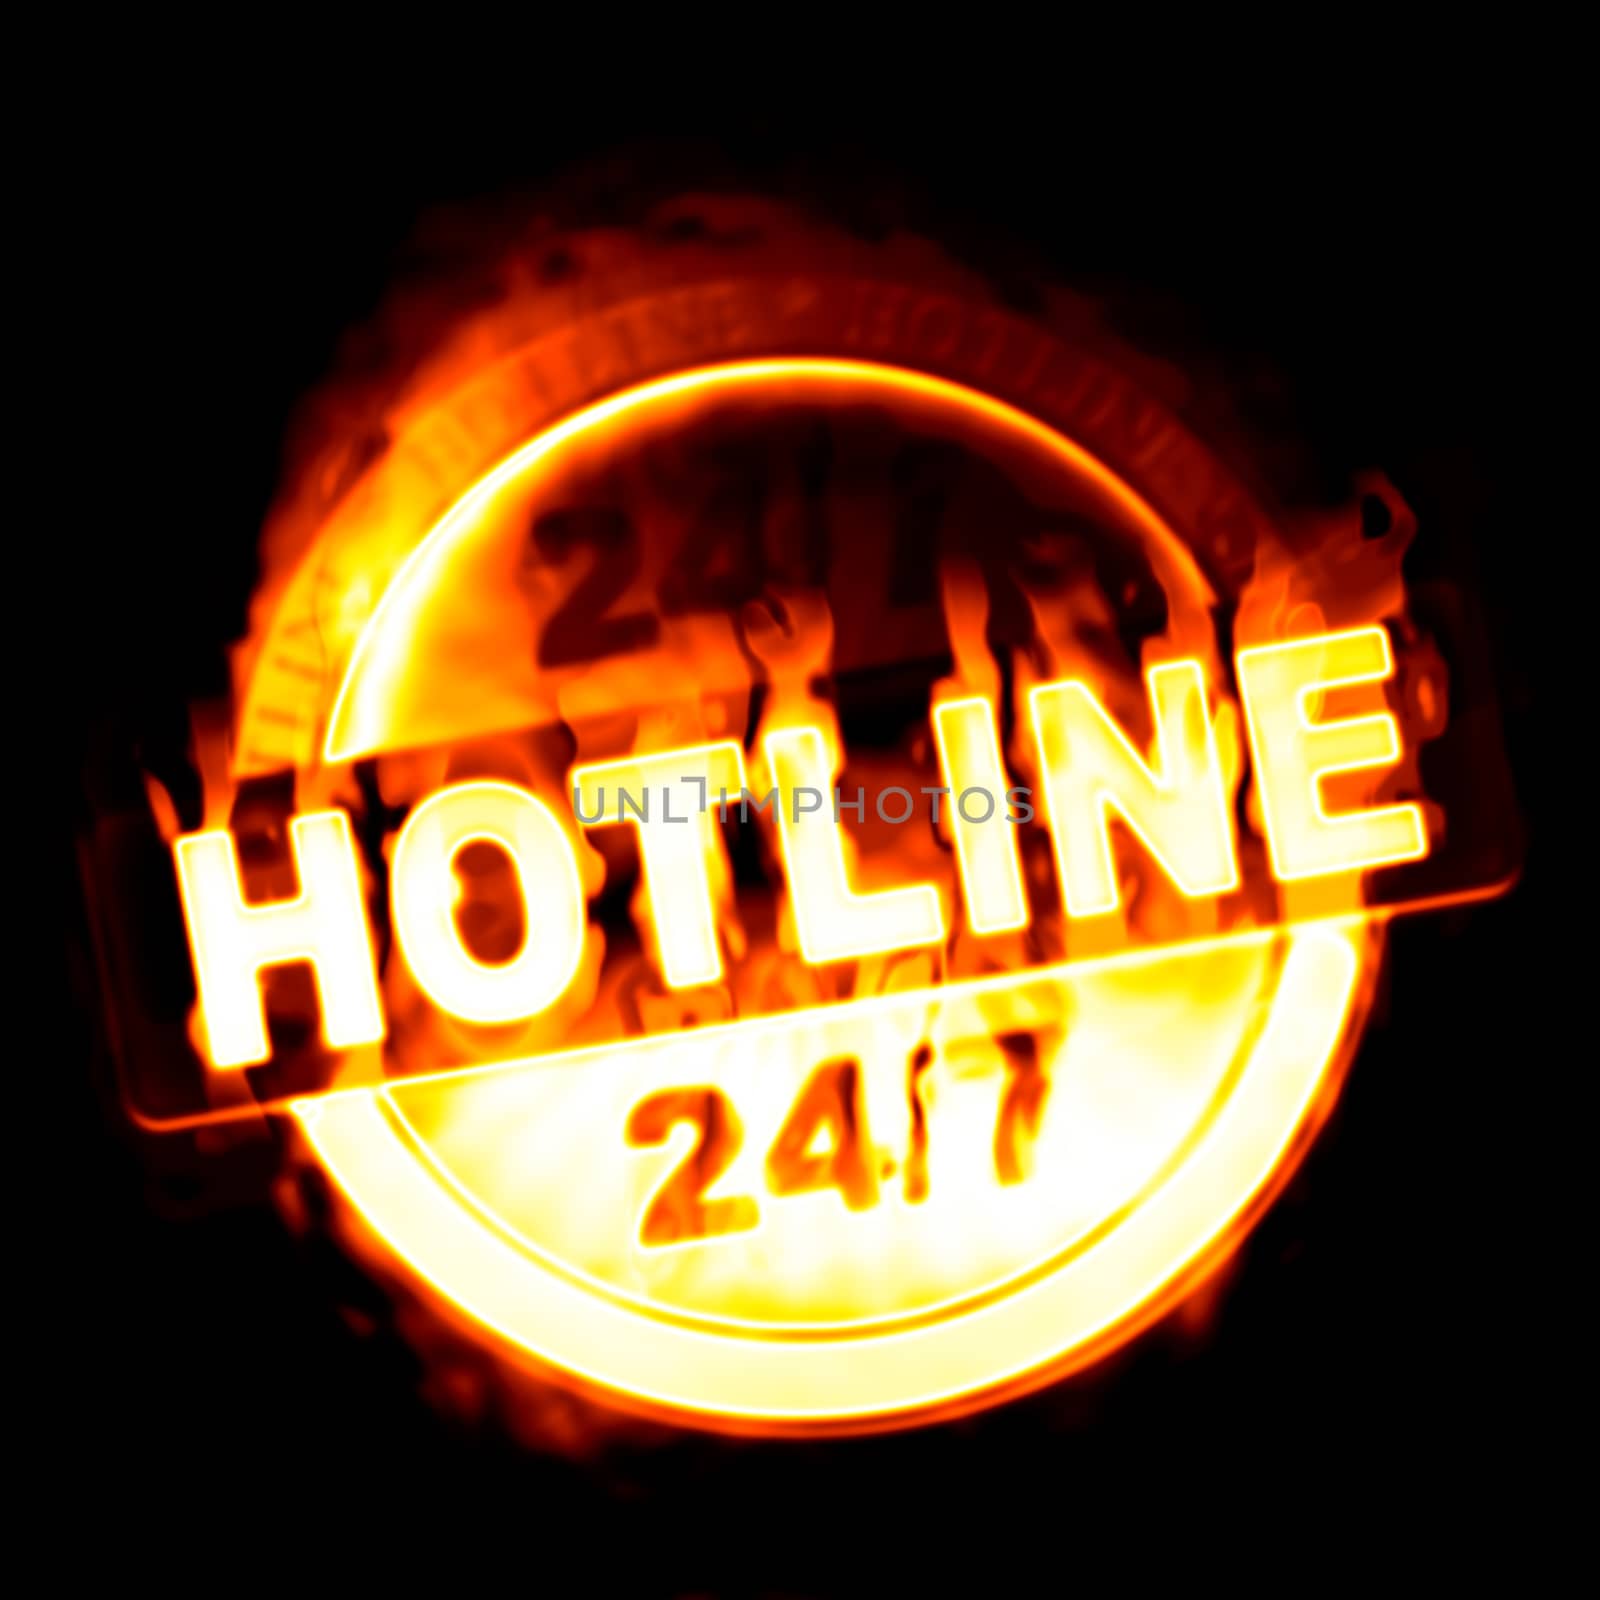 An illustration of a hotline on fire